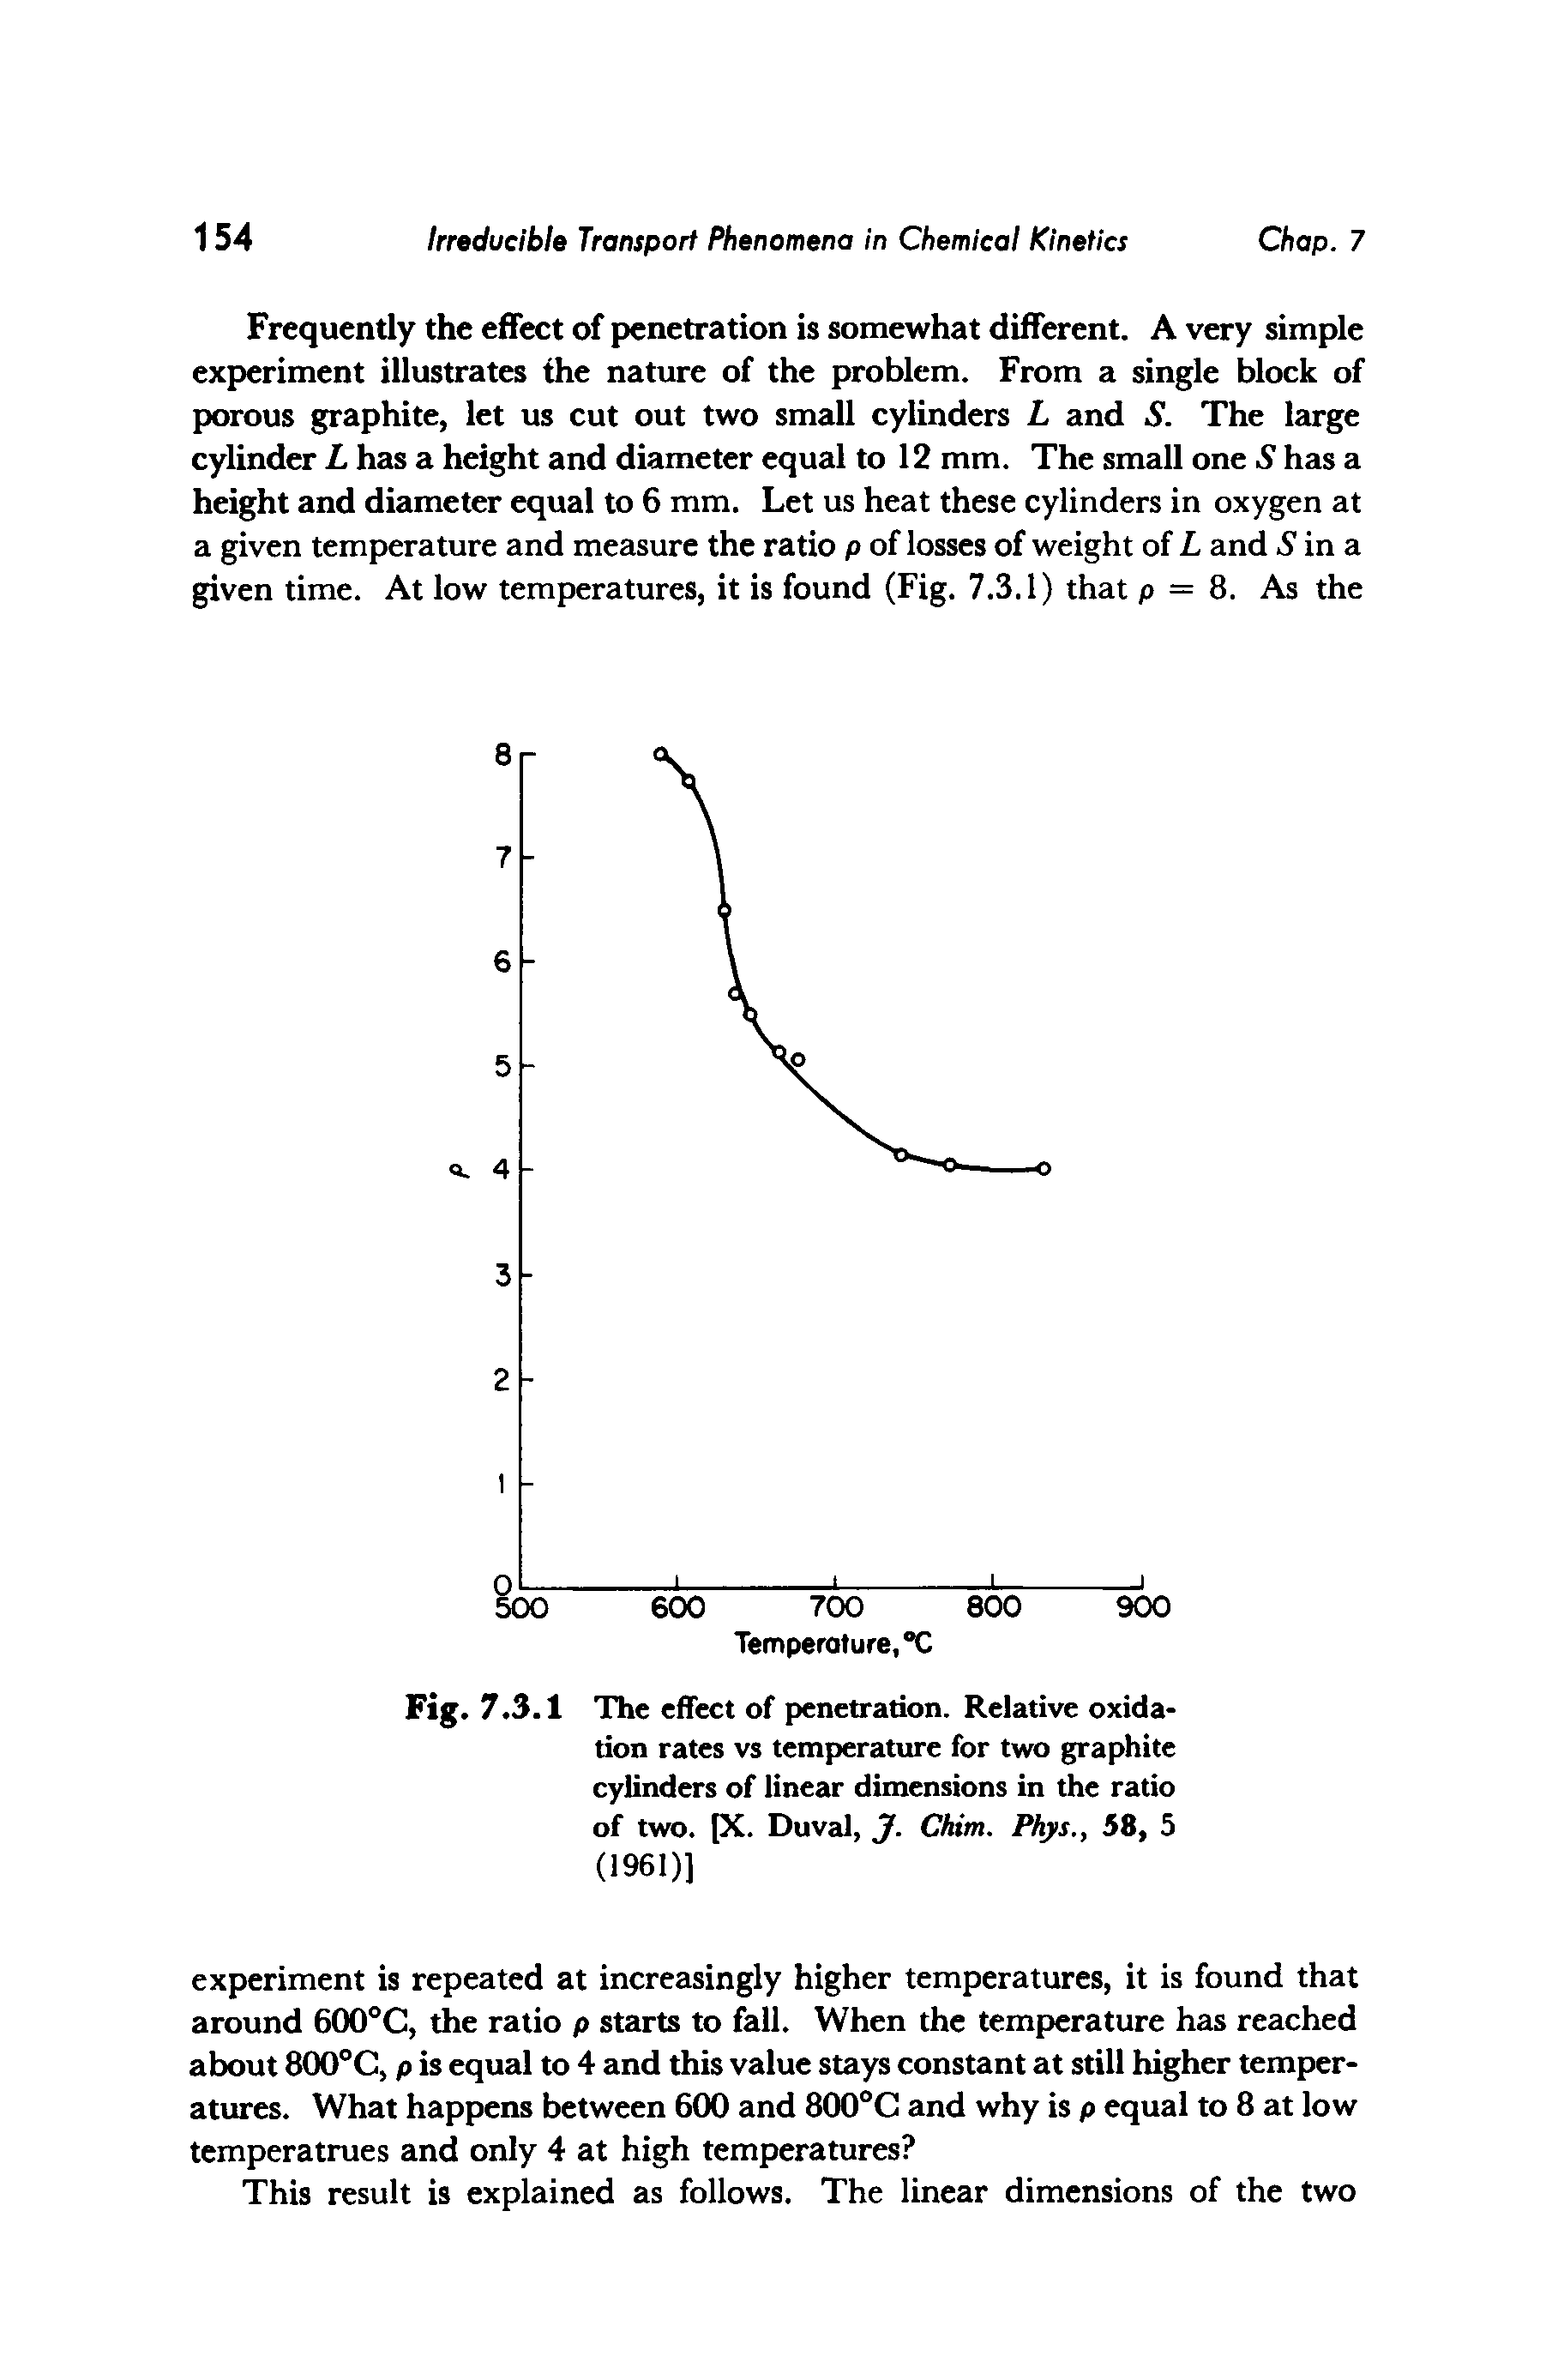 Fig. 7. 3.1 The effect of penetration. Relative oxidation rates vs temperature for two graphite cylinders of linear dimensions in the ratio of two. pc. Duval, J. Chim. Phys., 58, 5 (1961)]...